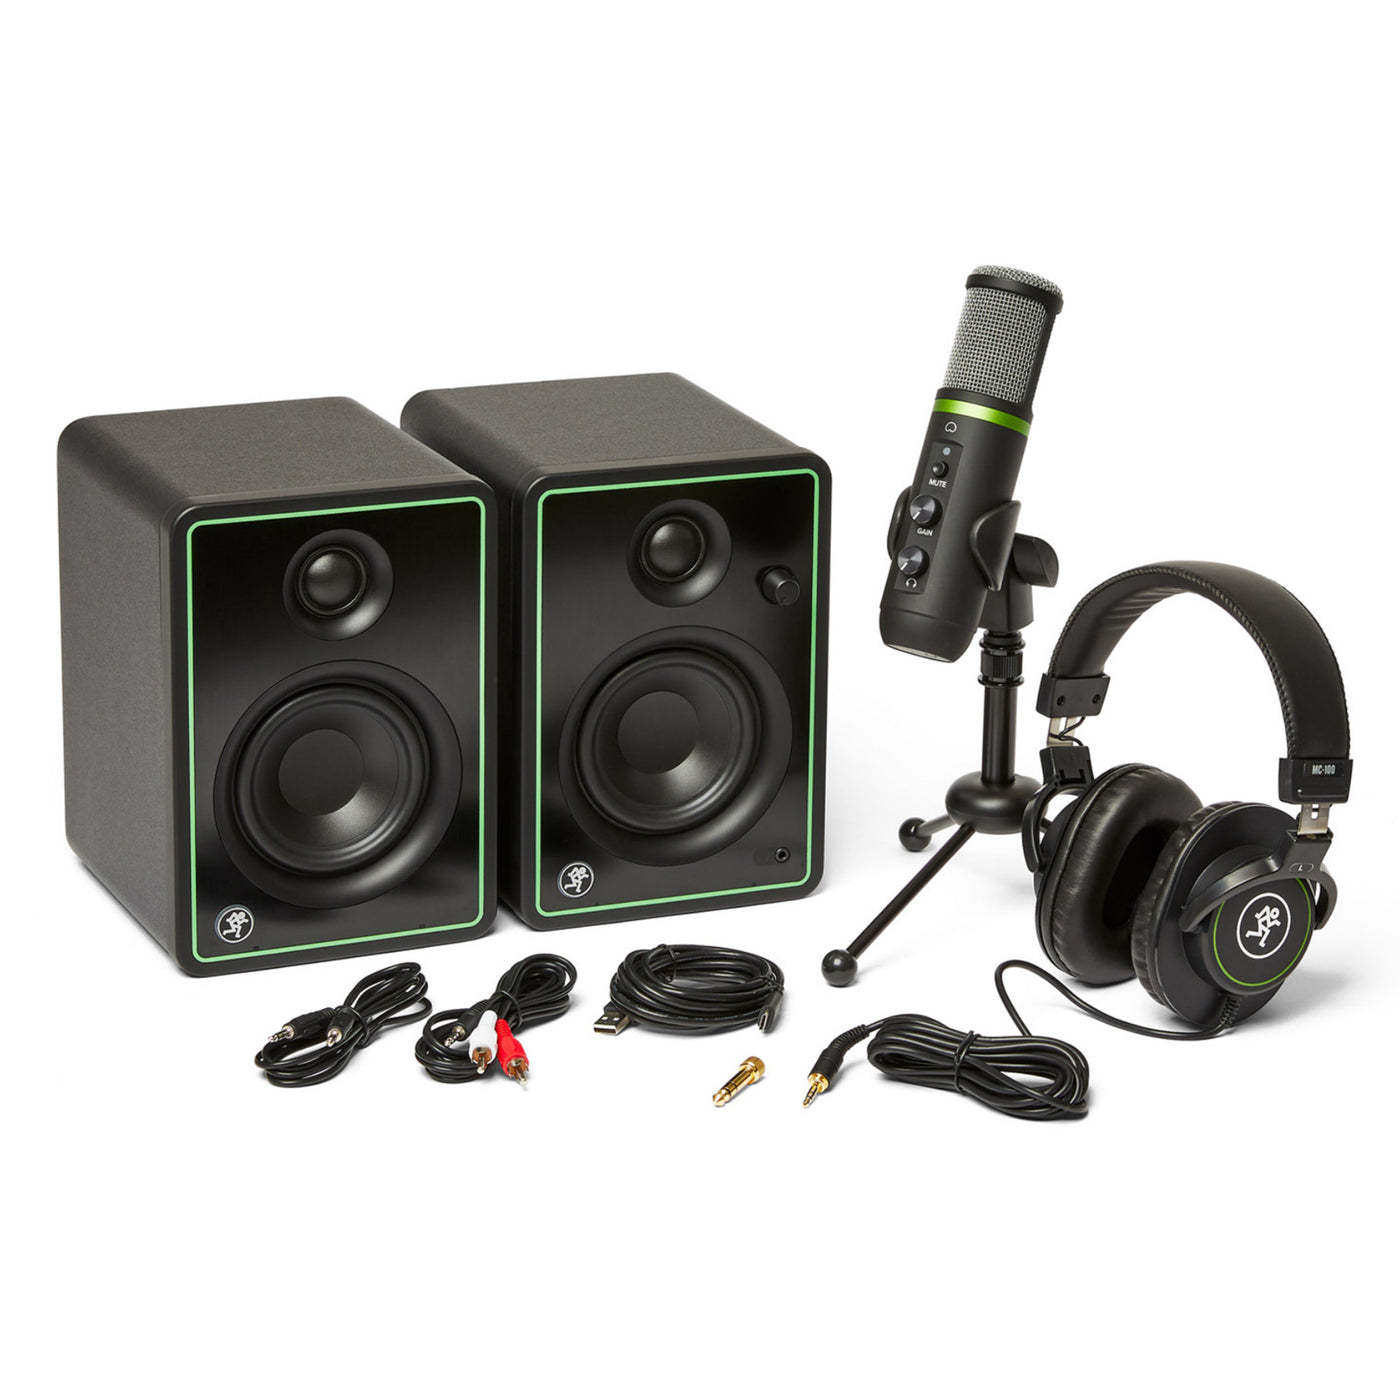 Mackie Content Creation Bundle with CR3-X Monitors, EM-USB Condenser Mic, and MC-100 Headphones